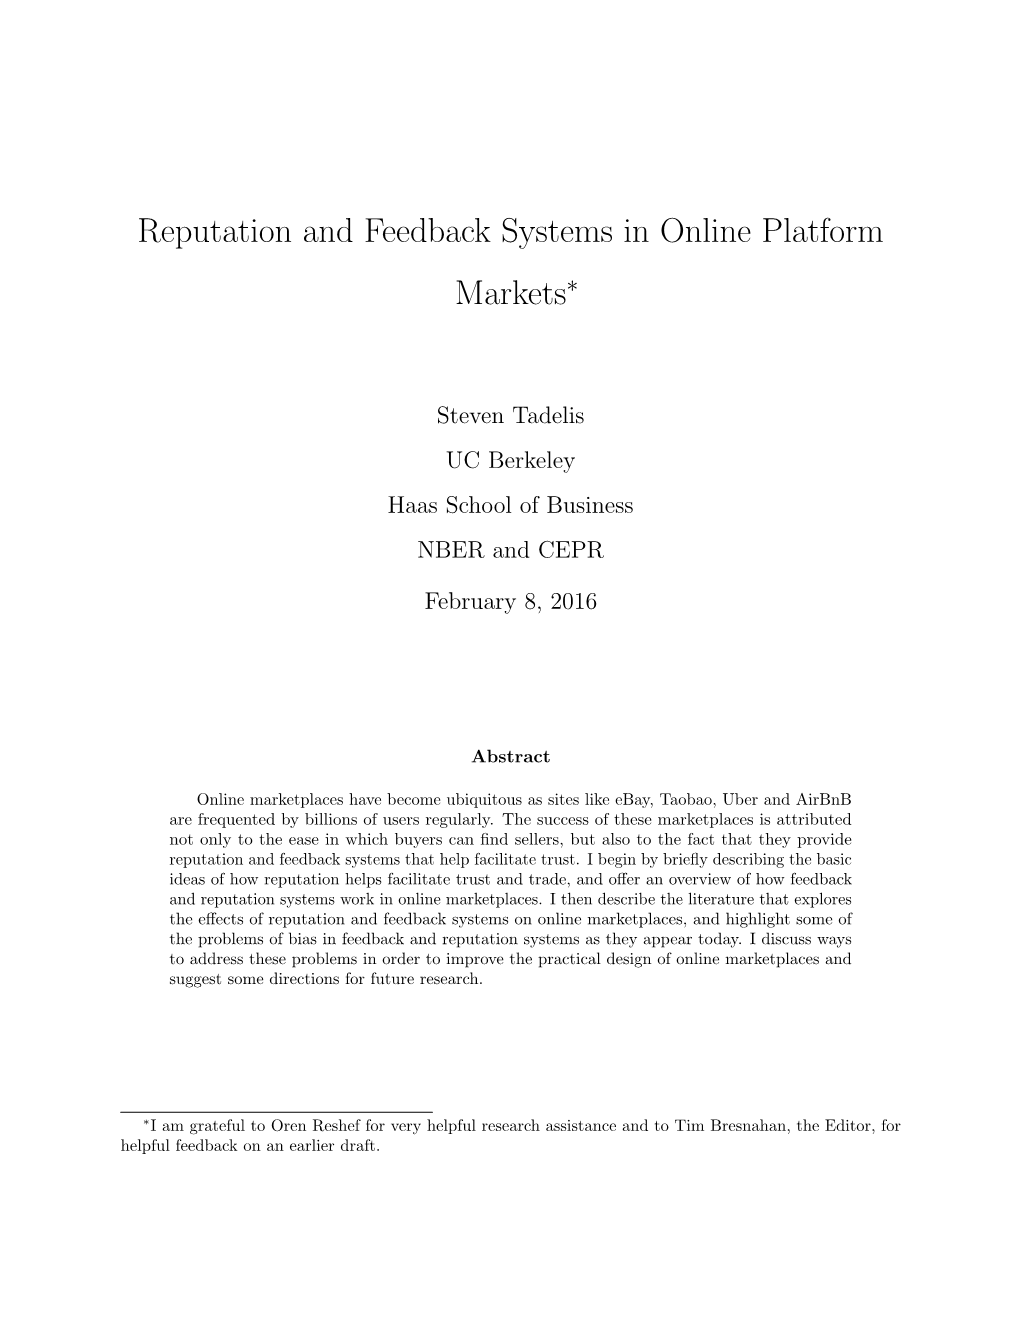 Reputation and Feedback Systems in Online Platform Markets∗